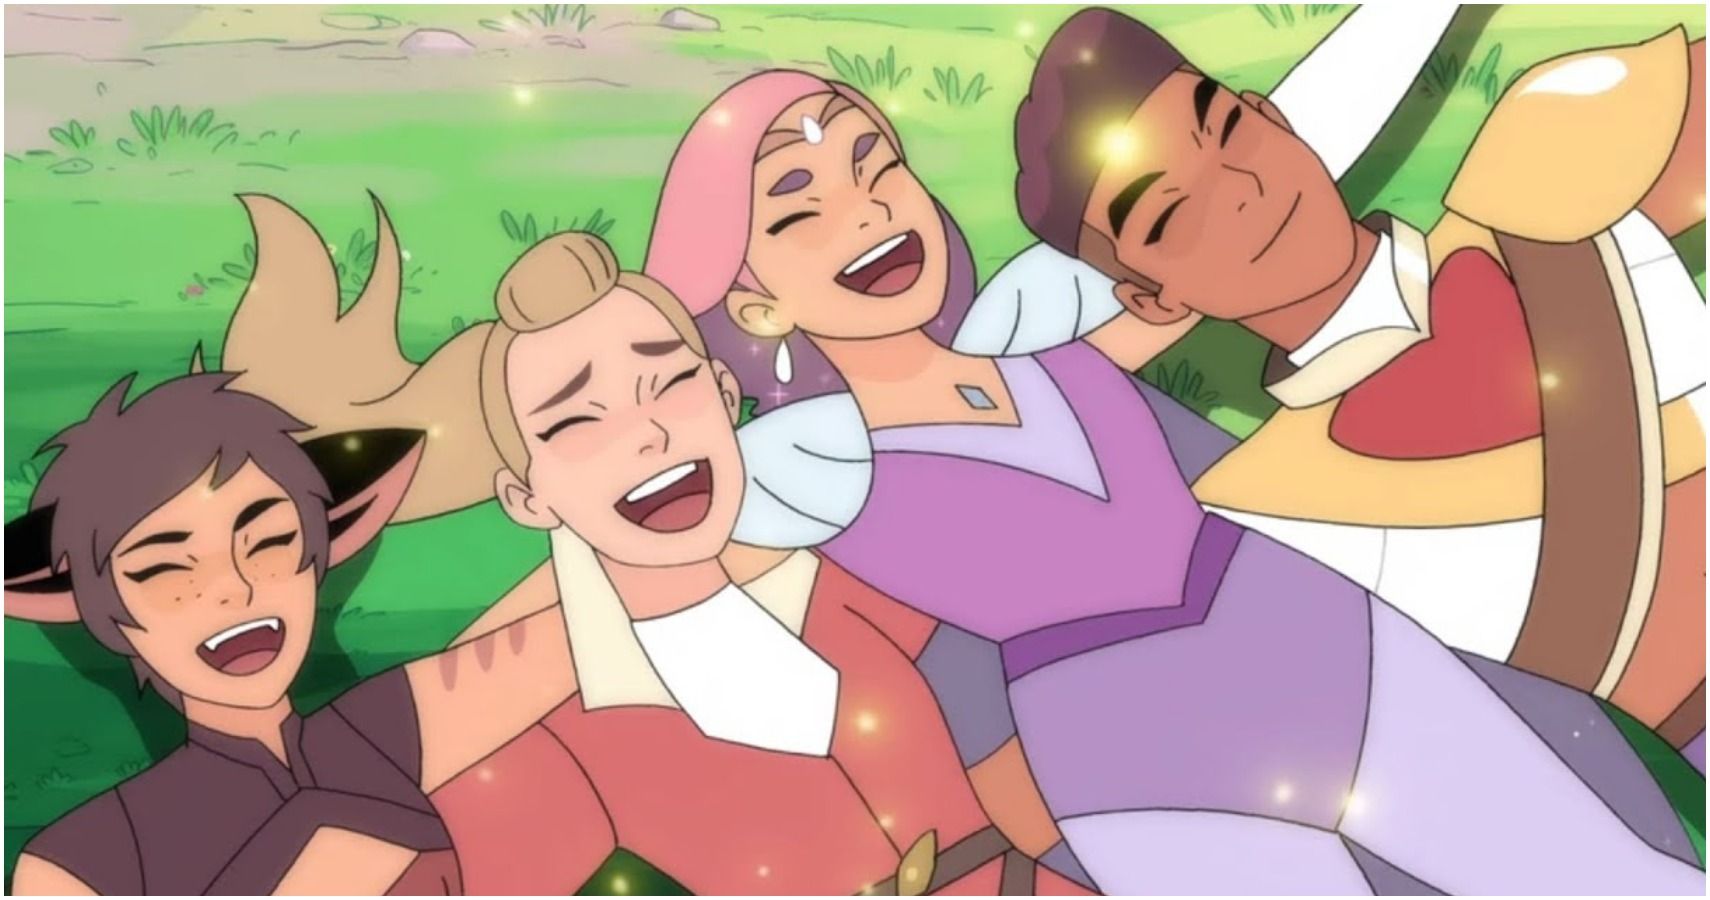 She Ra And The Princesses Of Power 5 Ways The Series Finale Was Perfect And 5 Ways It Could Improve